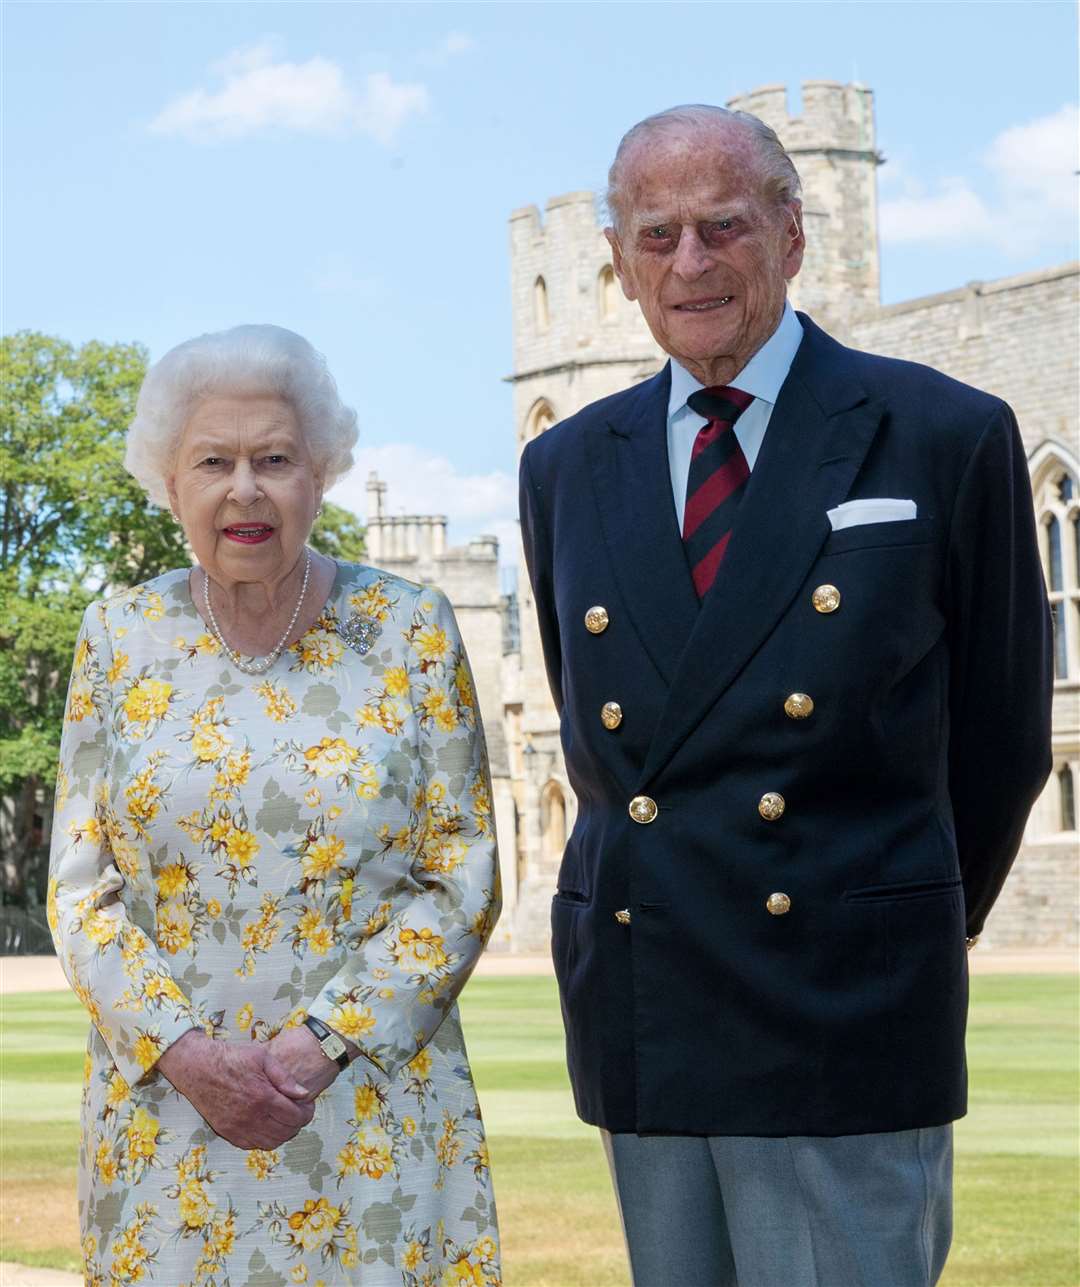 The Queen and Philip mark the duke’s birthday (Steve Parsons/PA)